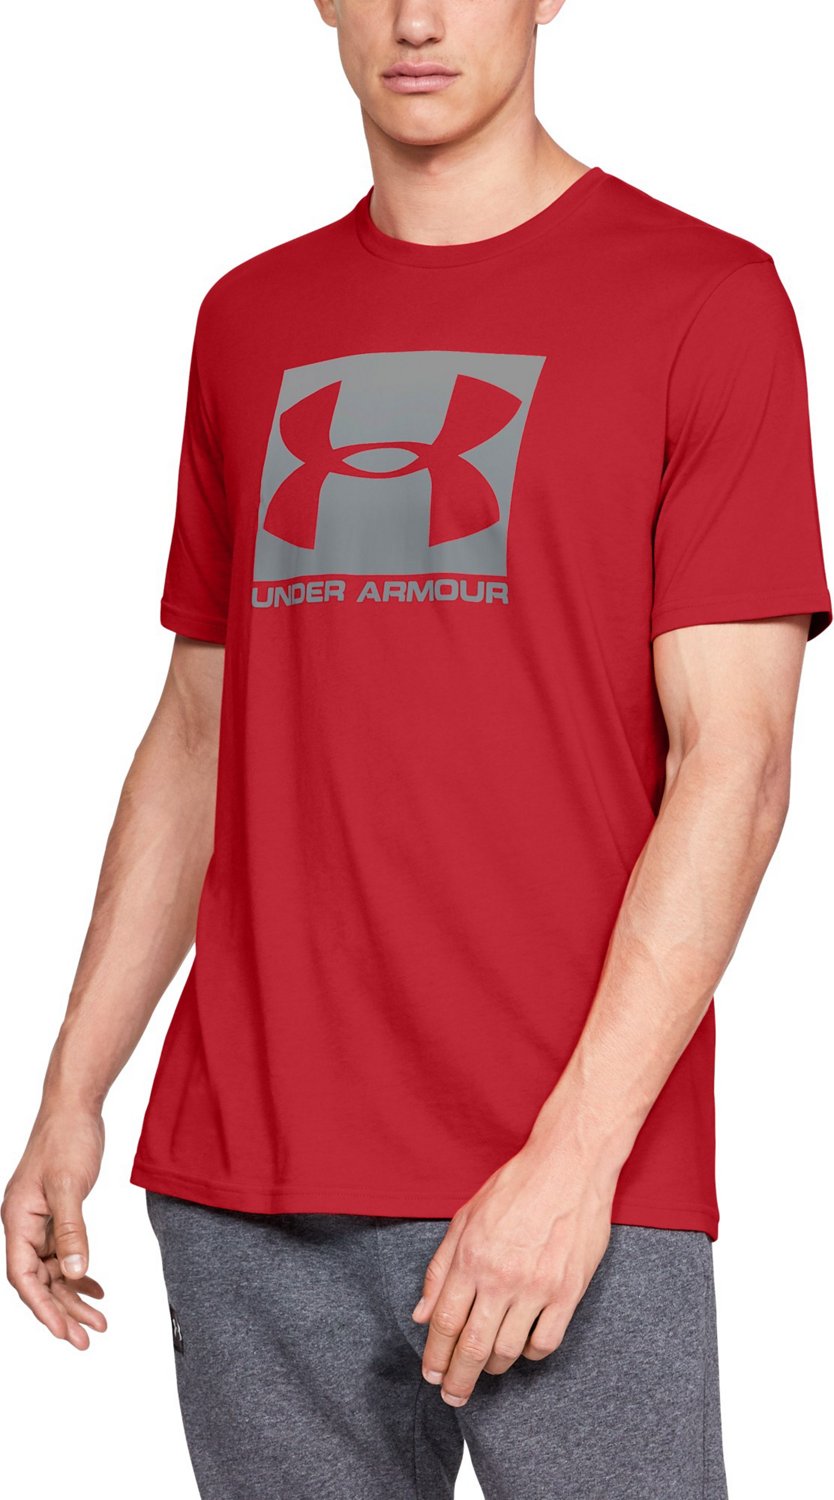 mens red under armour t shirt